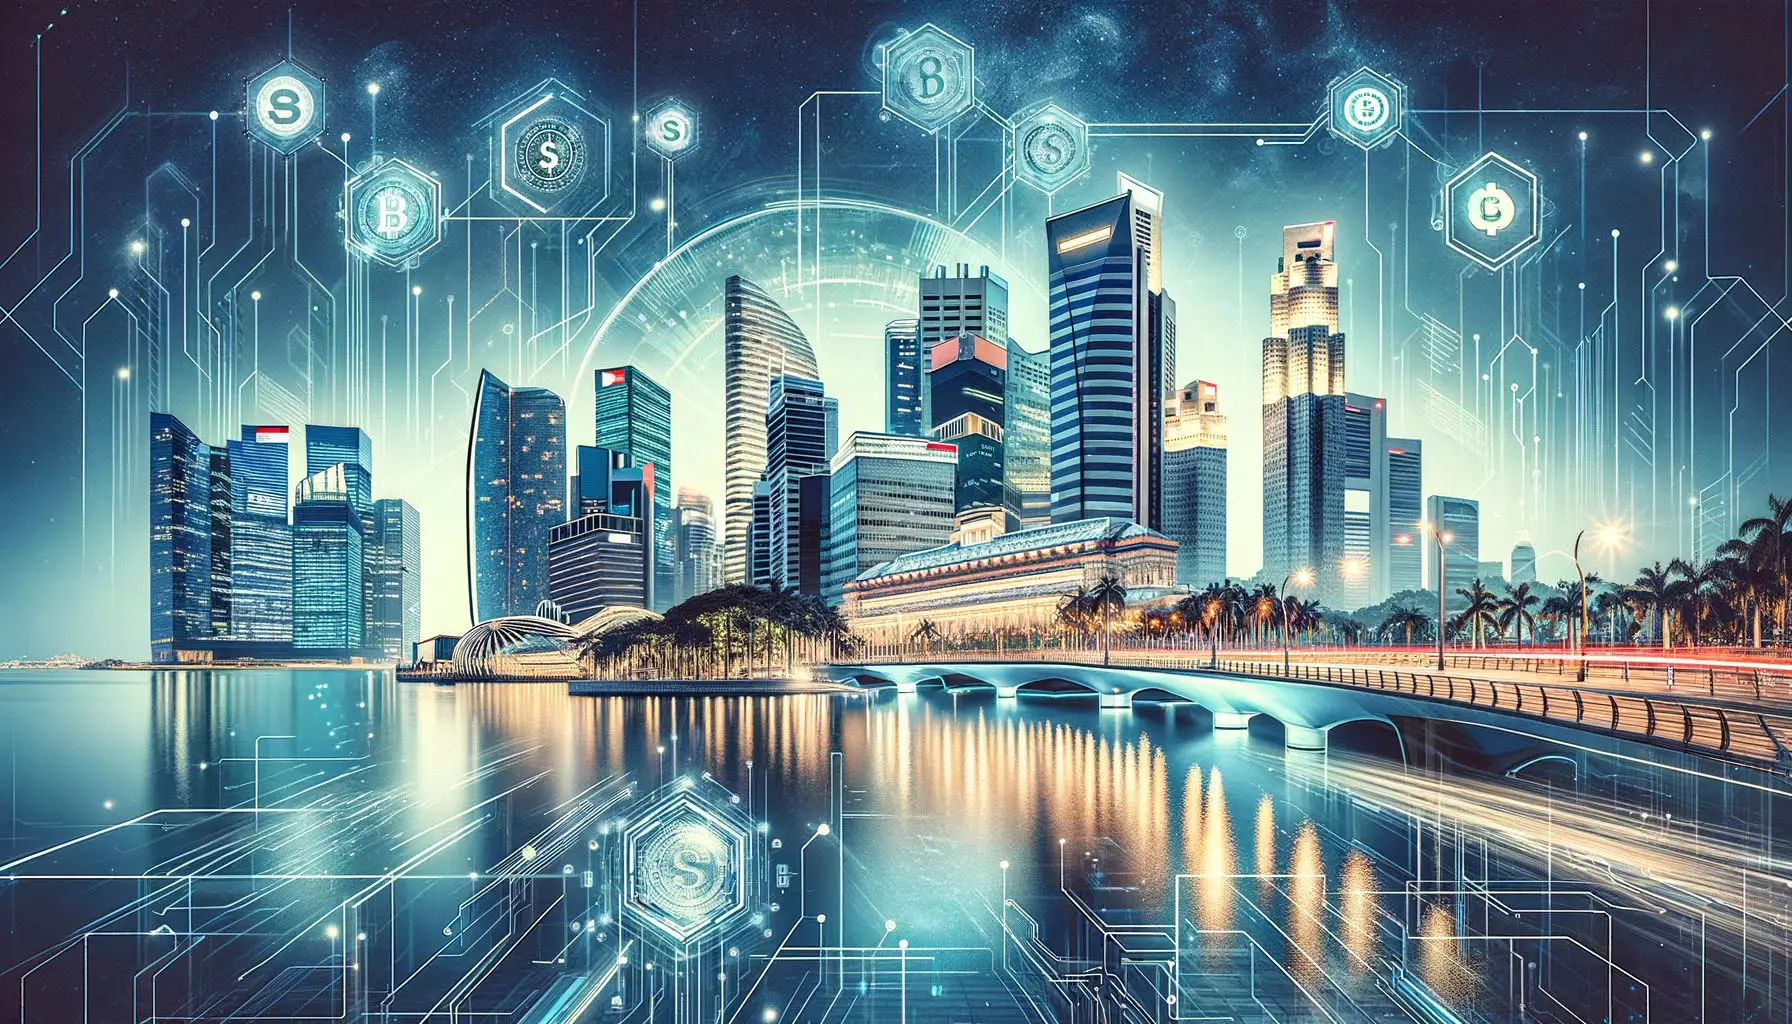 The Monetary Authority of Singapore Strengthens Regulations to Protect Retail Crypto Users